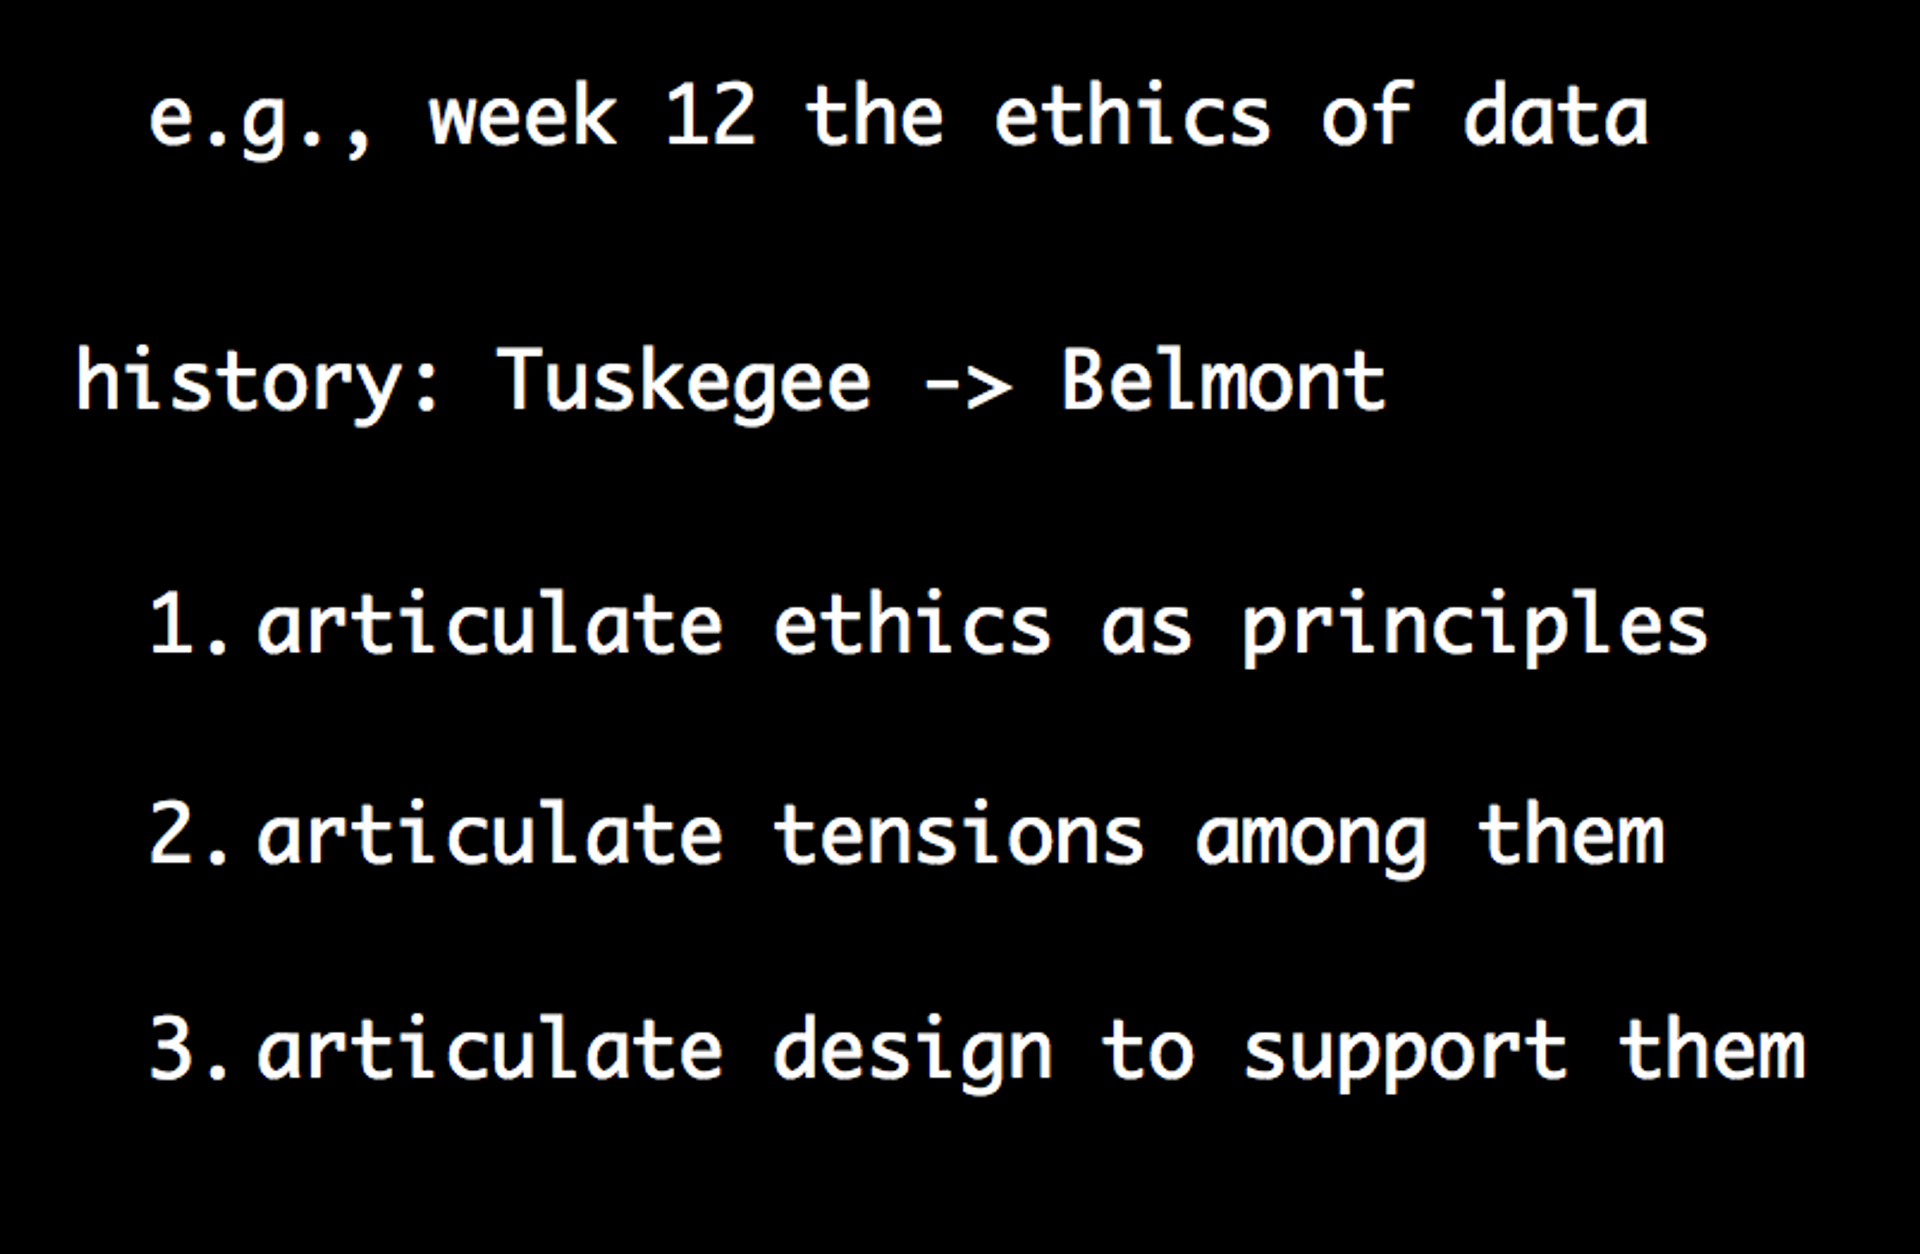 week 12 the ethics of data